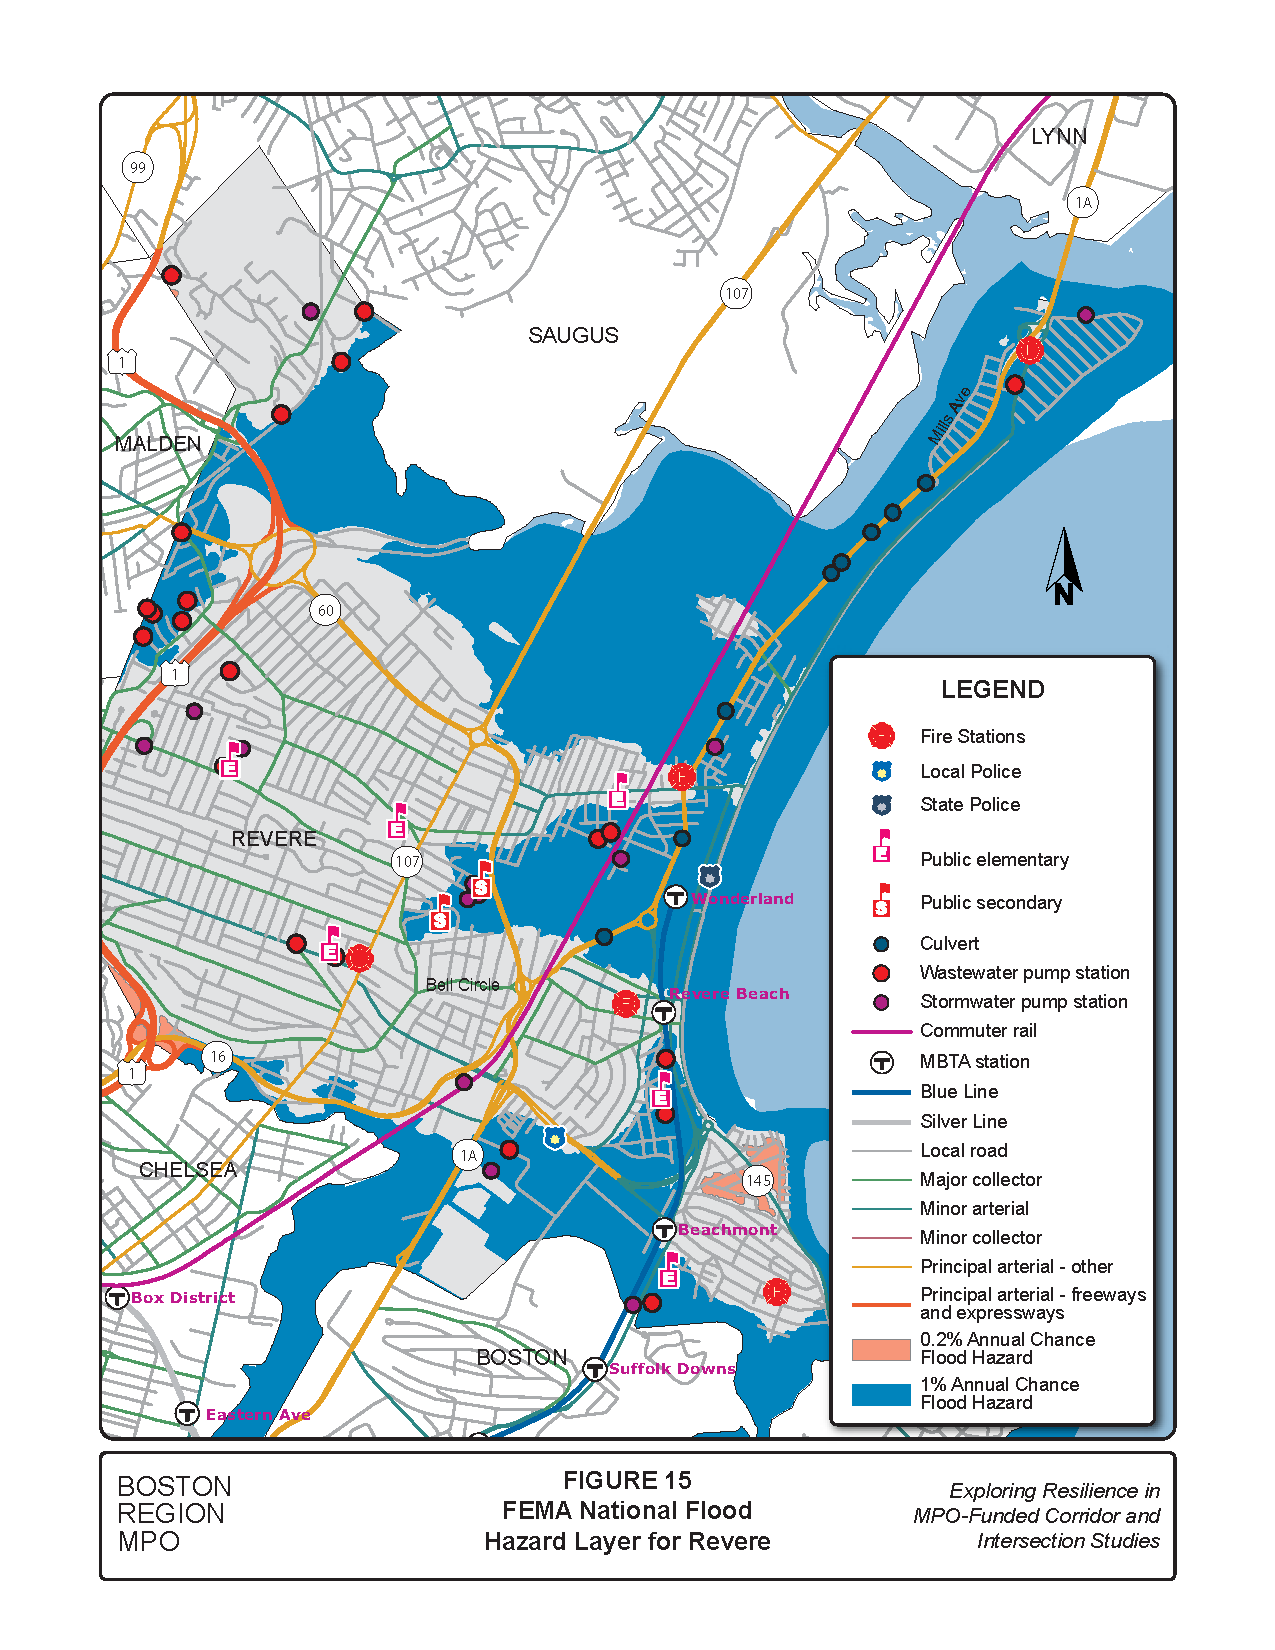 Figure 15 is a map of the study area showing the parts of Route 1A that are vulnerable to flooding in a 100-year and 500-year storm.